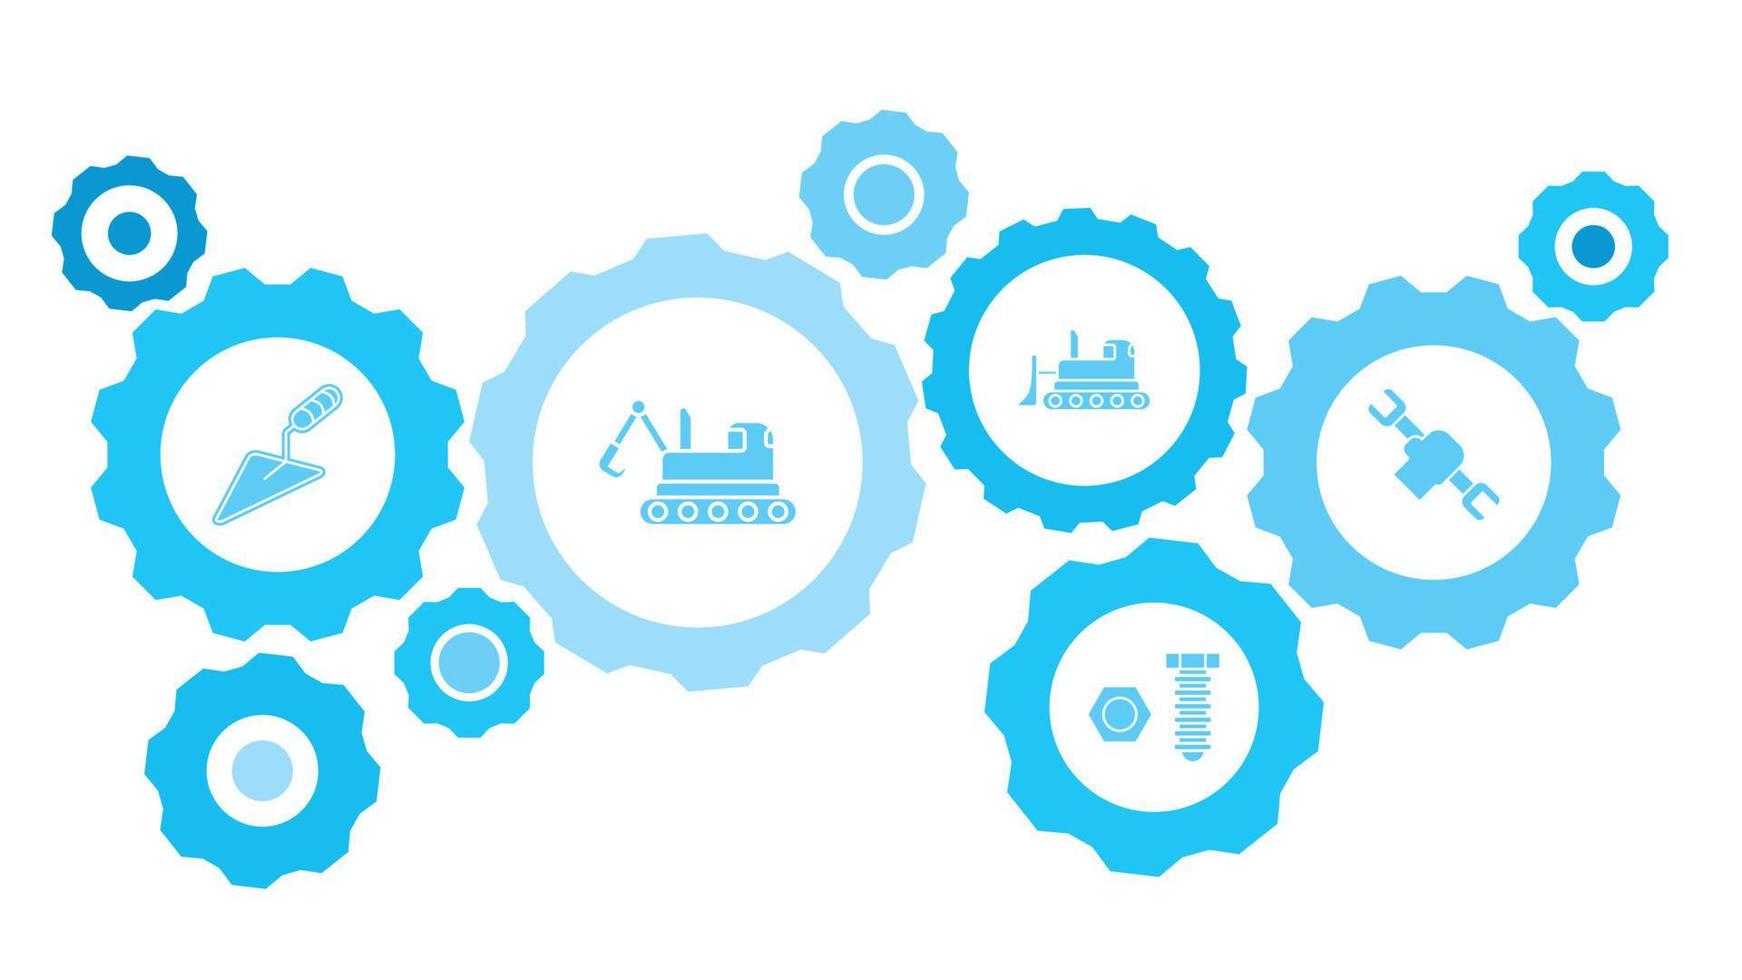 Connected gears and vector icons for logistic, service, shipping, distribution, transport, market, communicate concepts. building, construction, industry, wrench gear blue icon set on white background